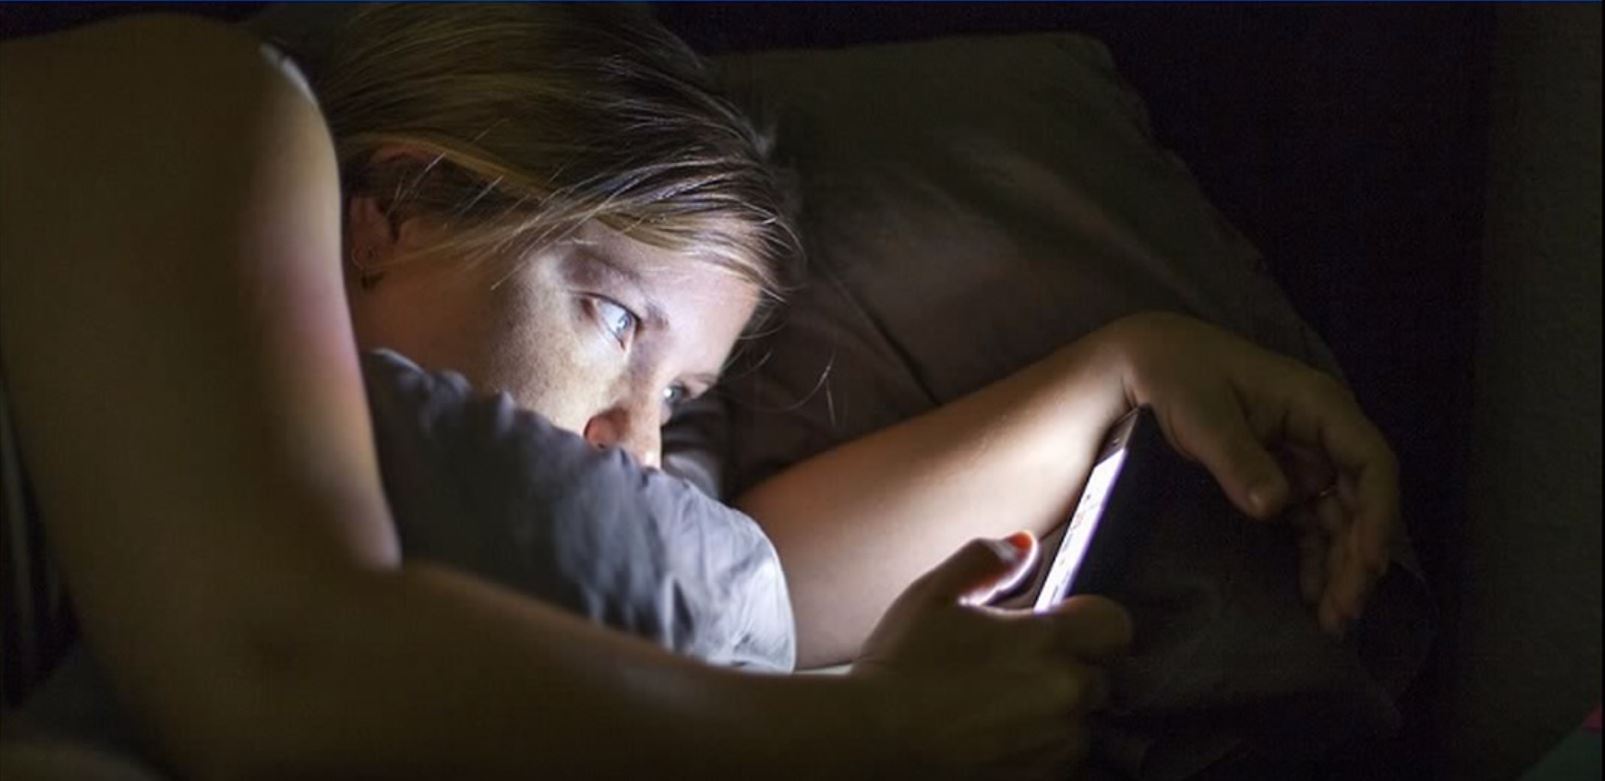 6 habits to stop morning smartphone addiction